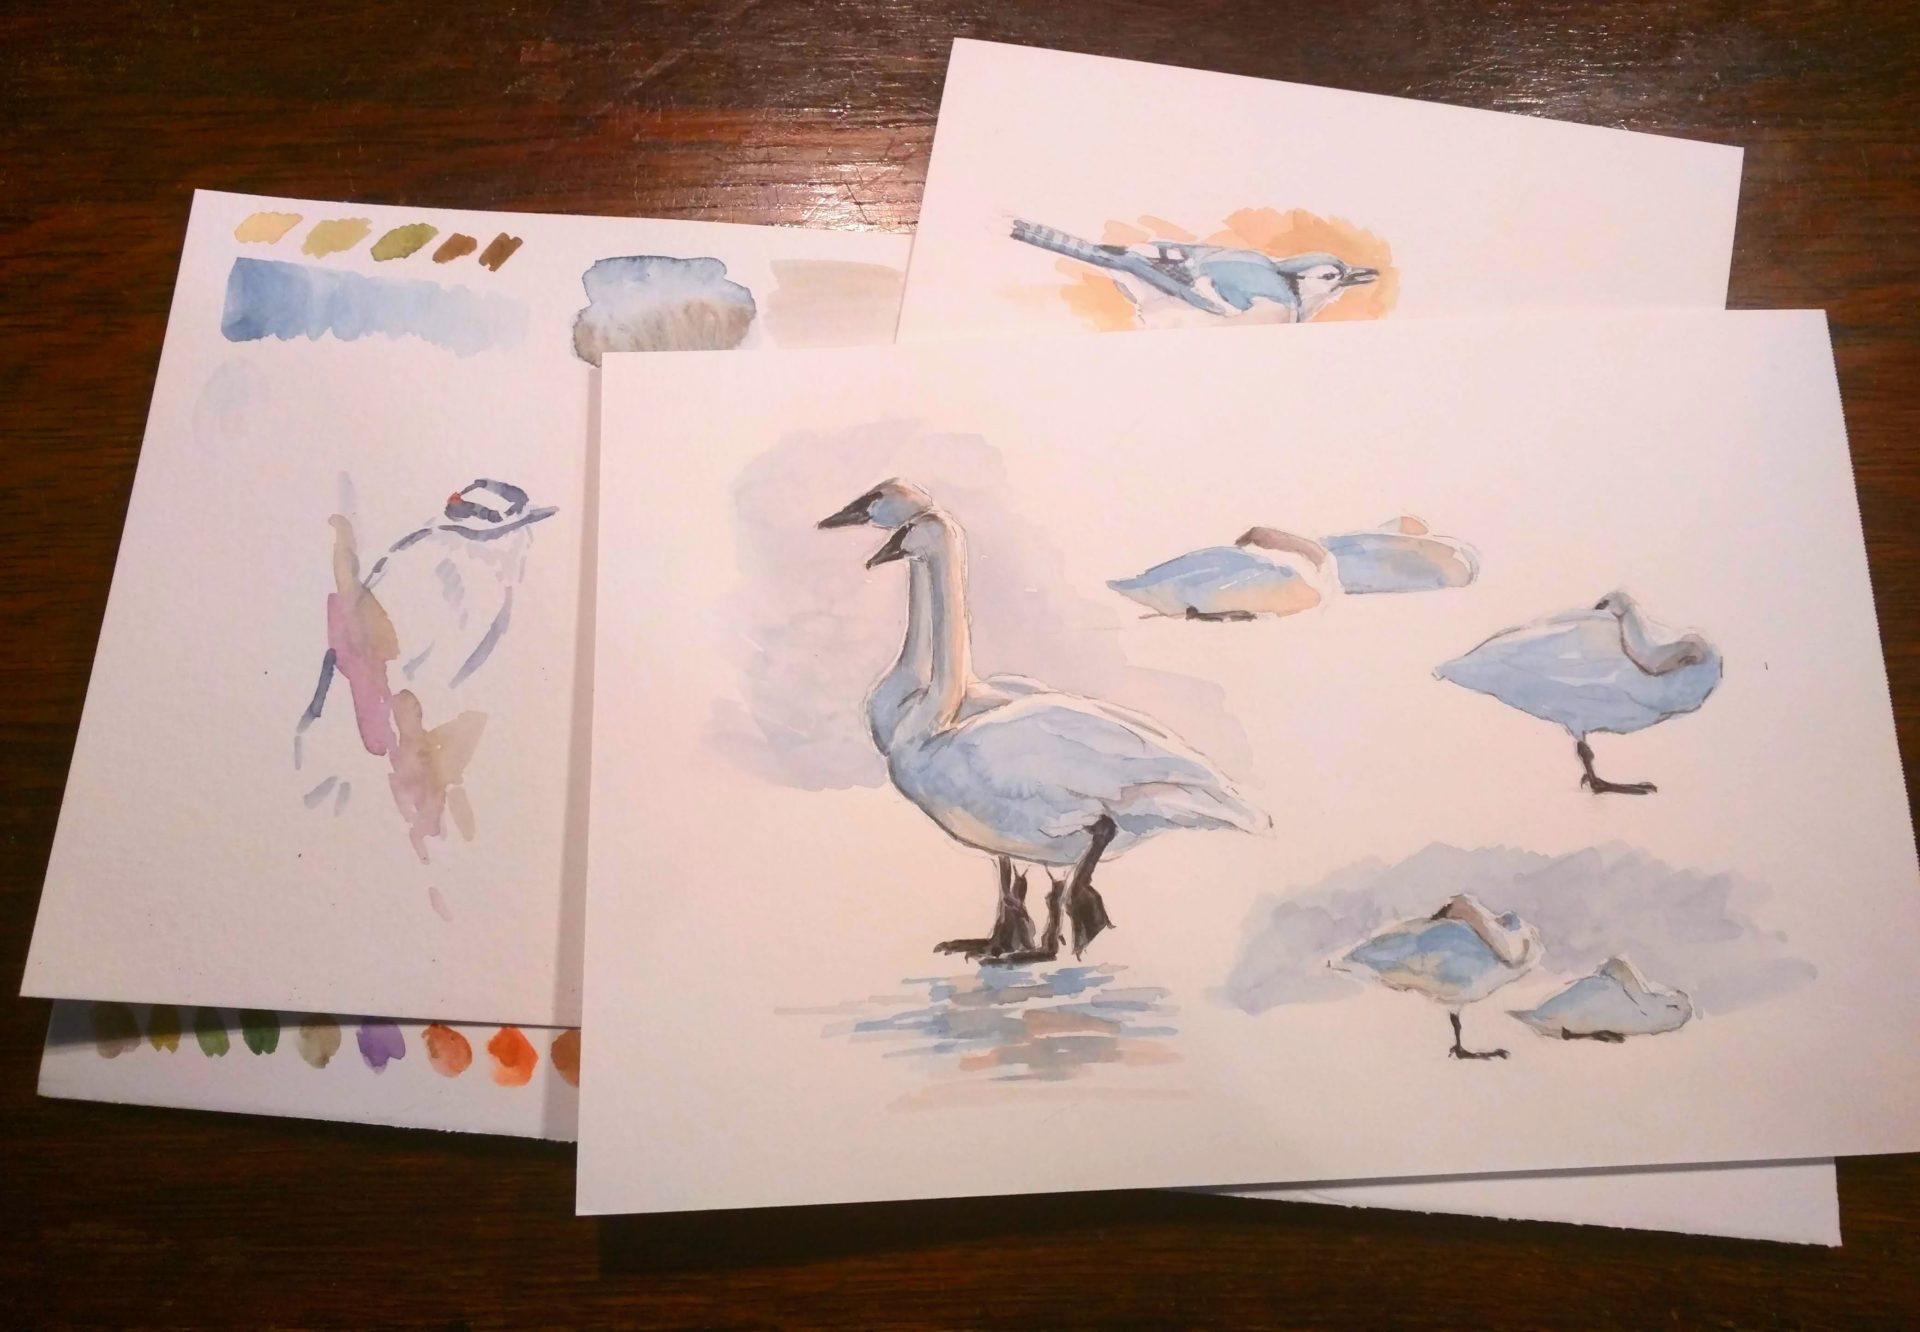 Rebecca Latham - Trumpeter Swans wintering and songbirds, transparent watercolor sketch